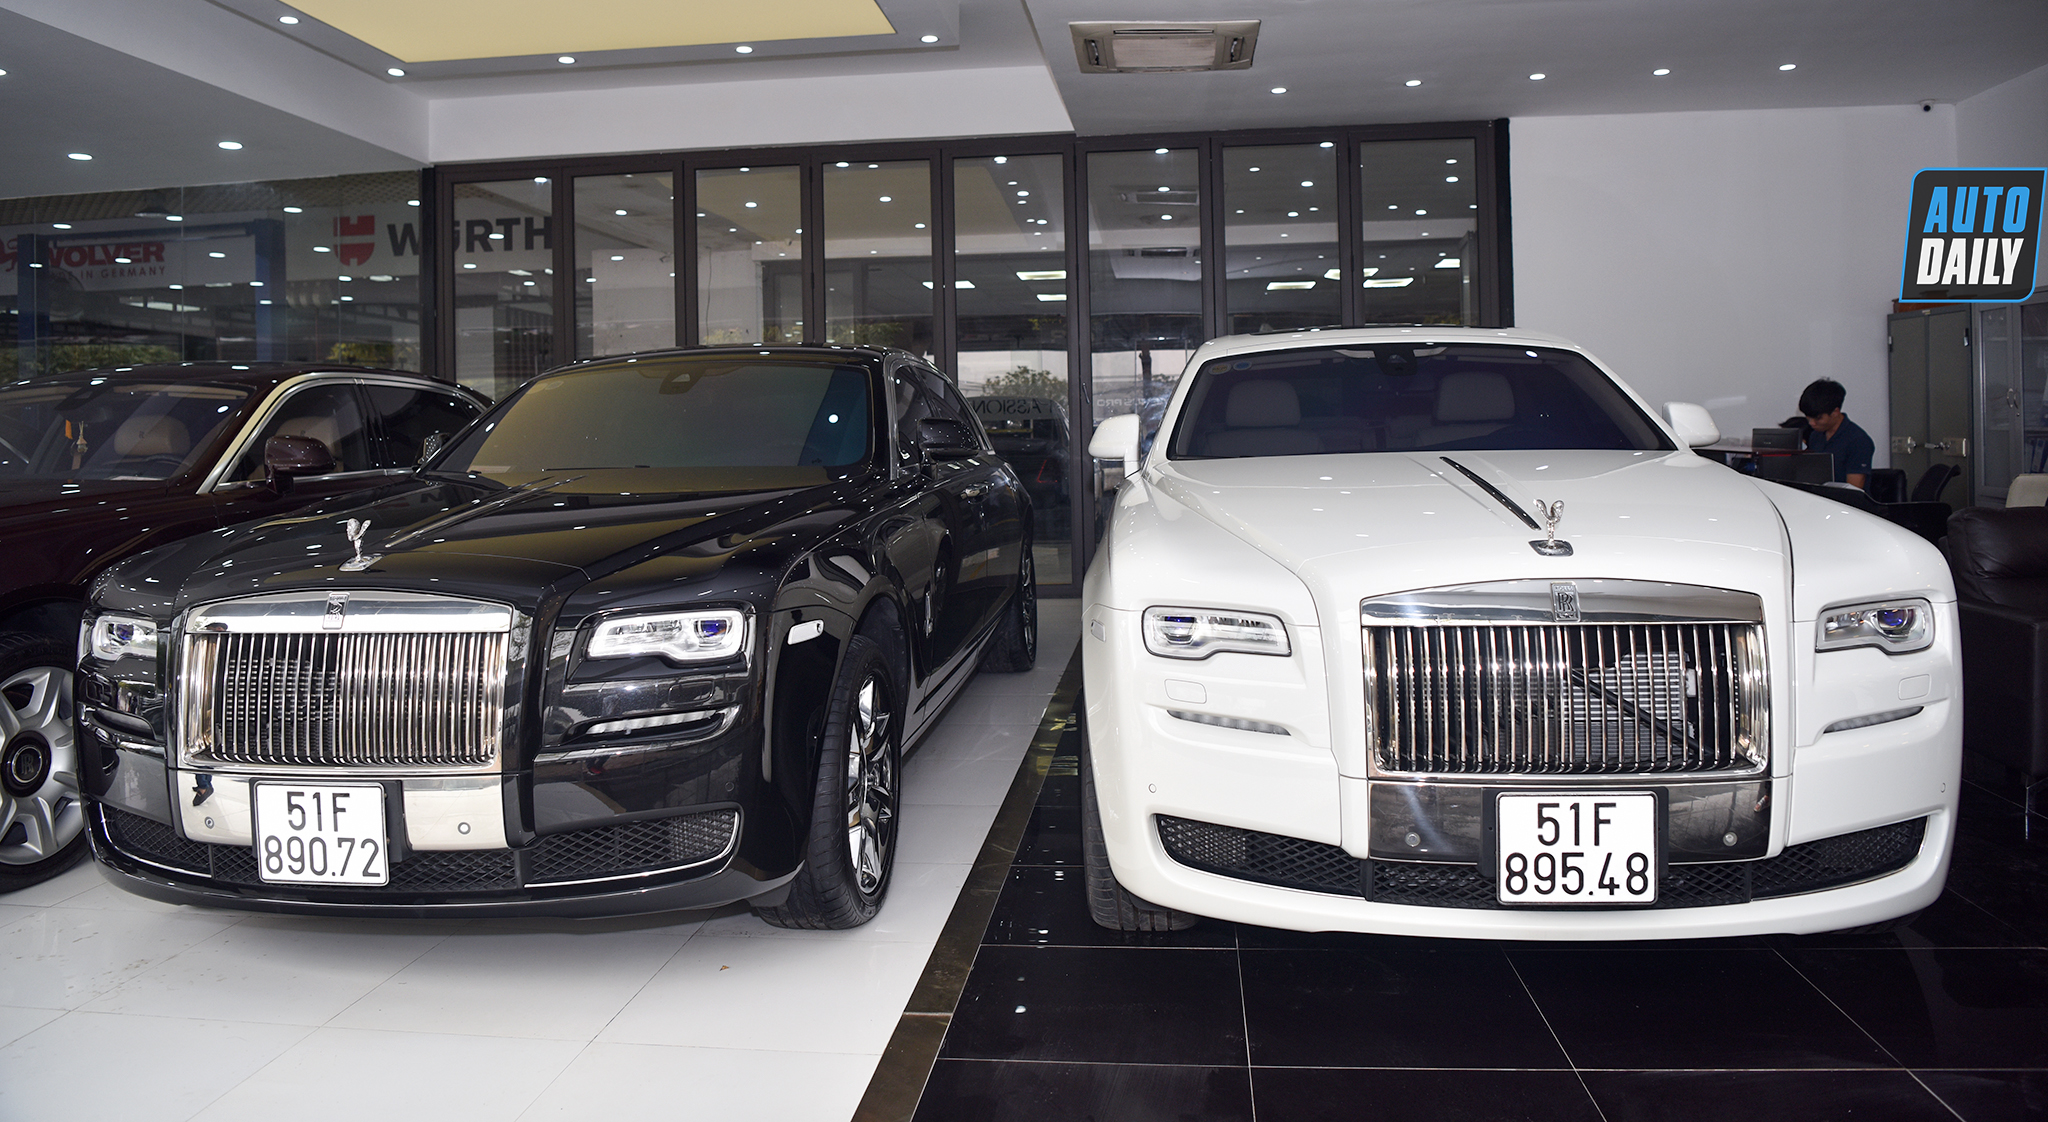 Used  RollsRoyce Cars for Sale  Motorparks